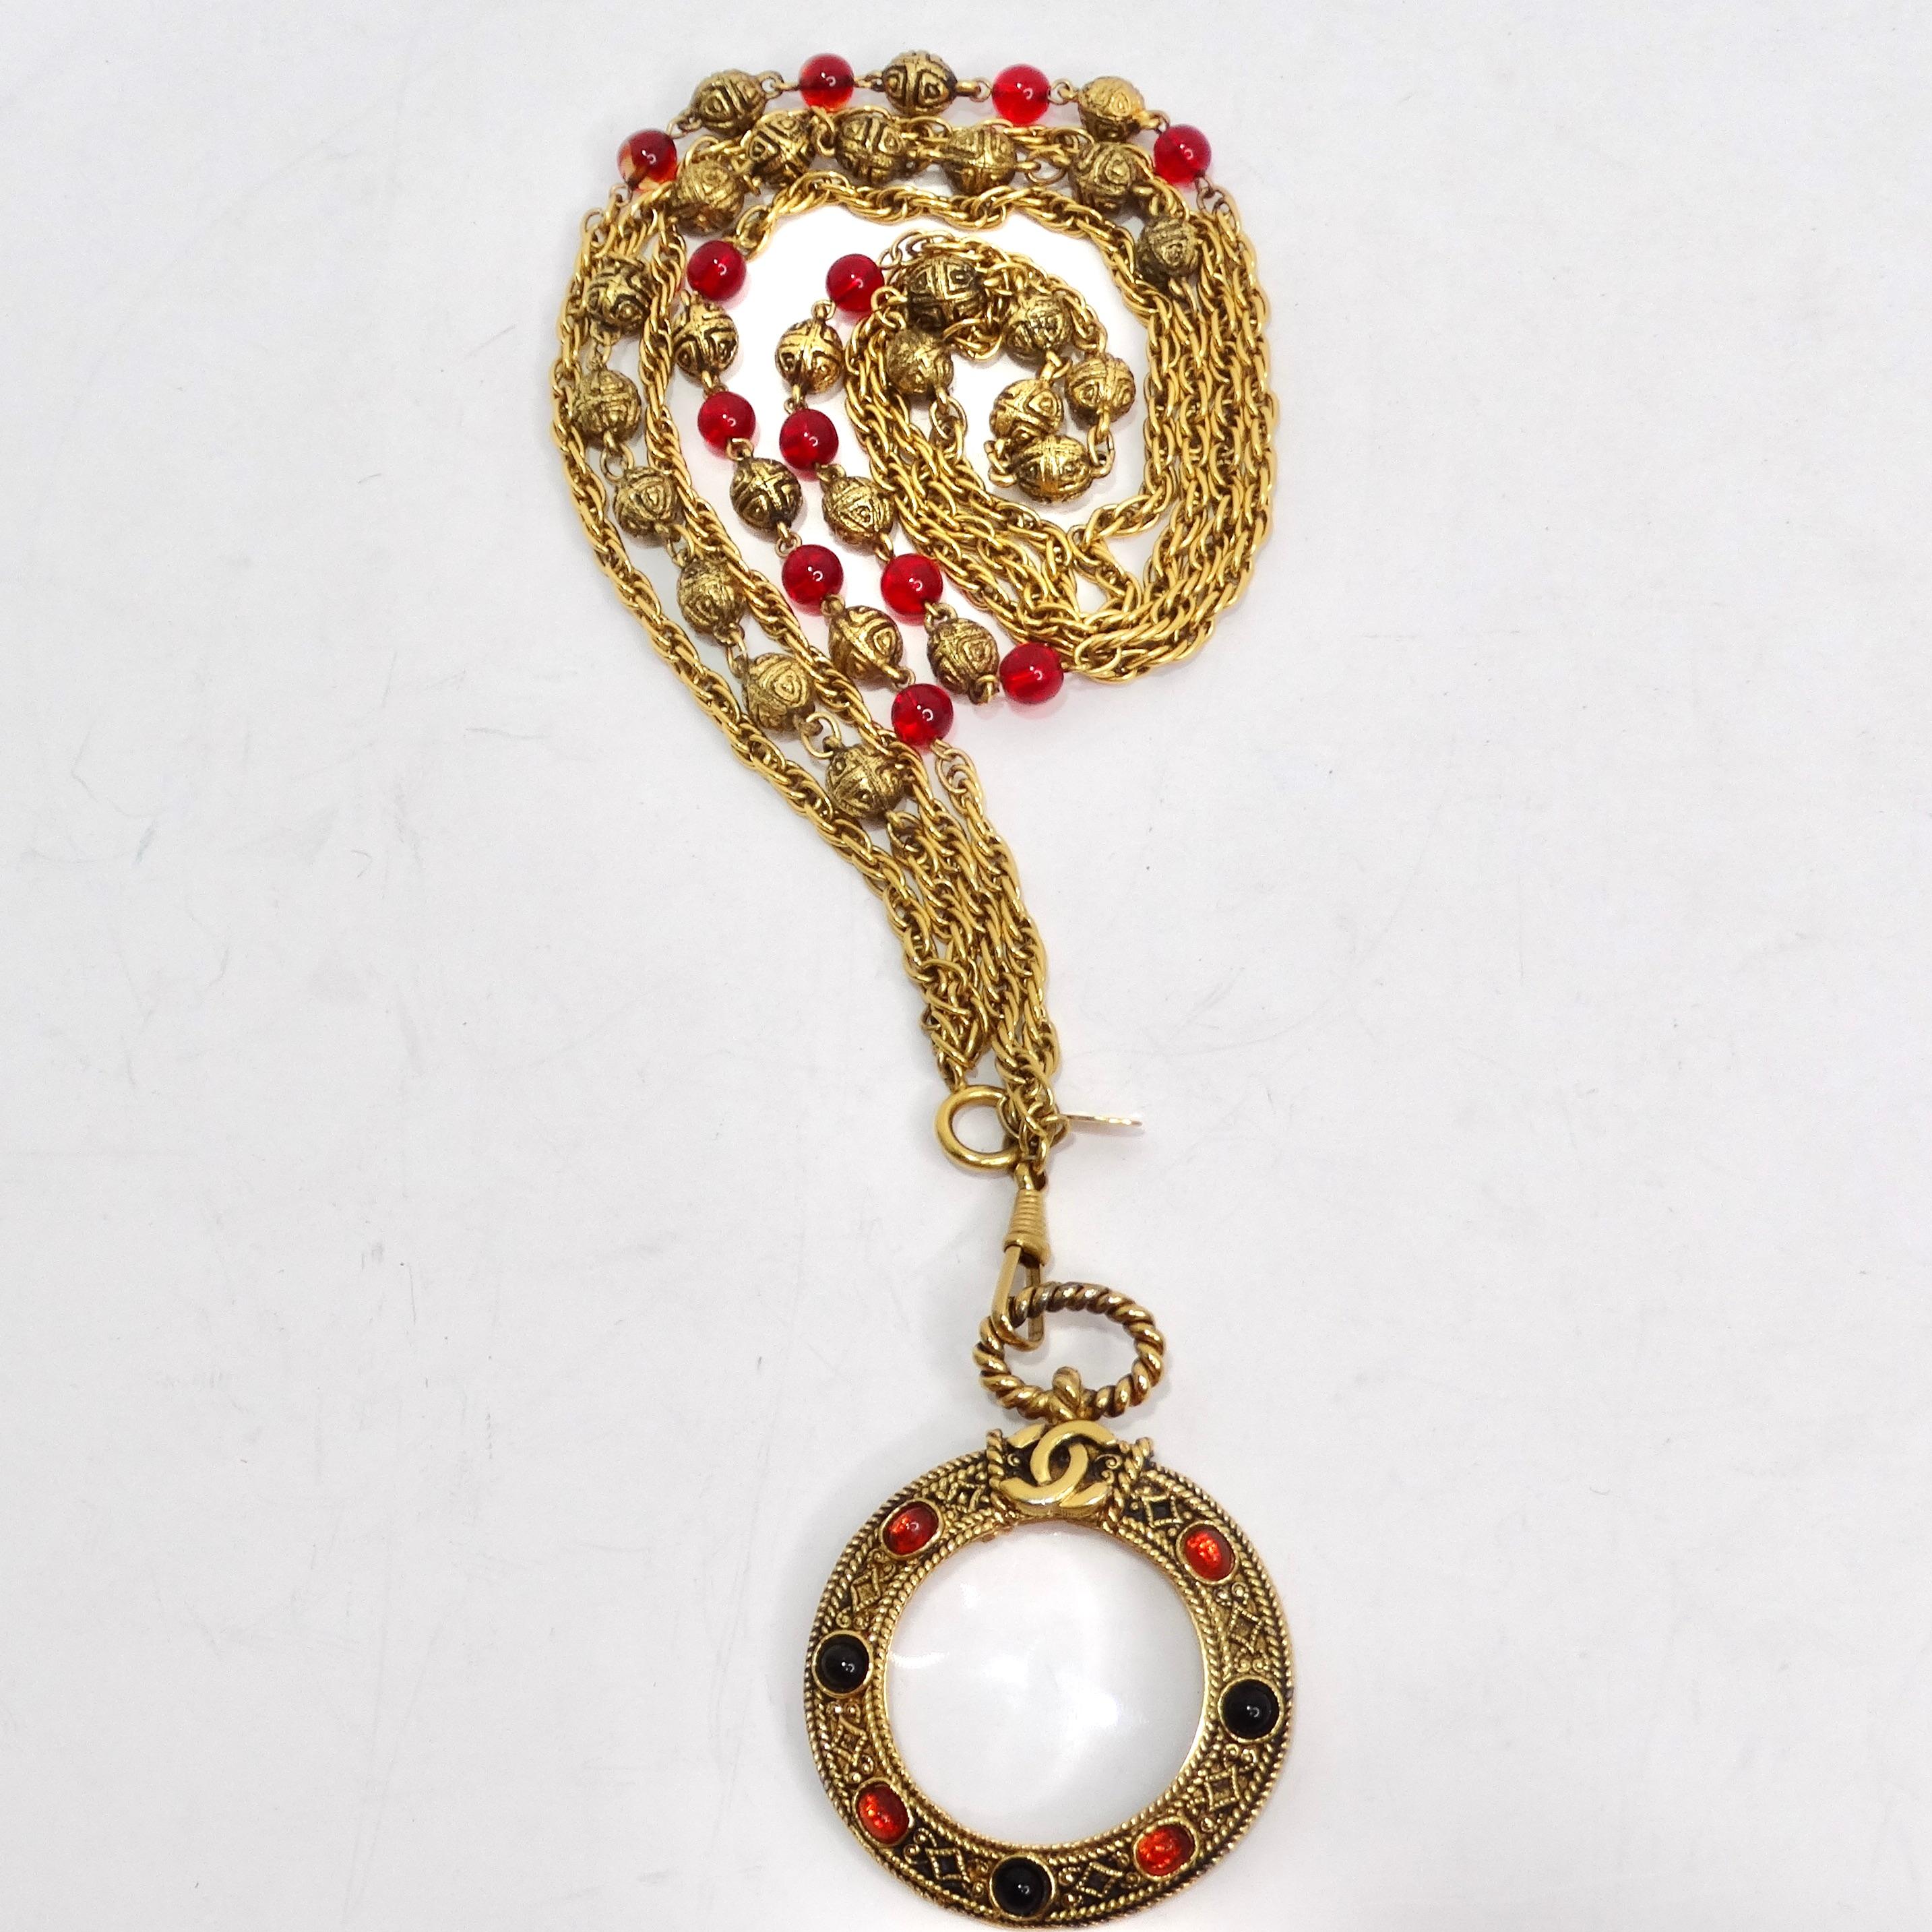 Chanel Gold & Red Gripoix Magnifying Glass Necklace In Excellent Condition For Sale In Scottsdale, AZ